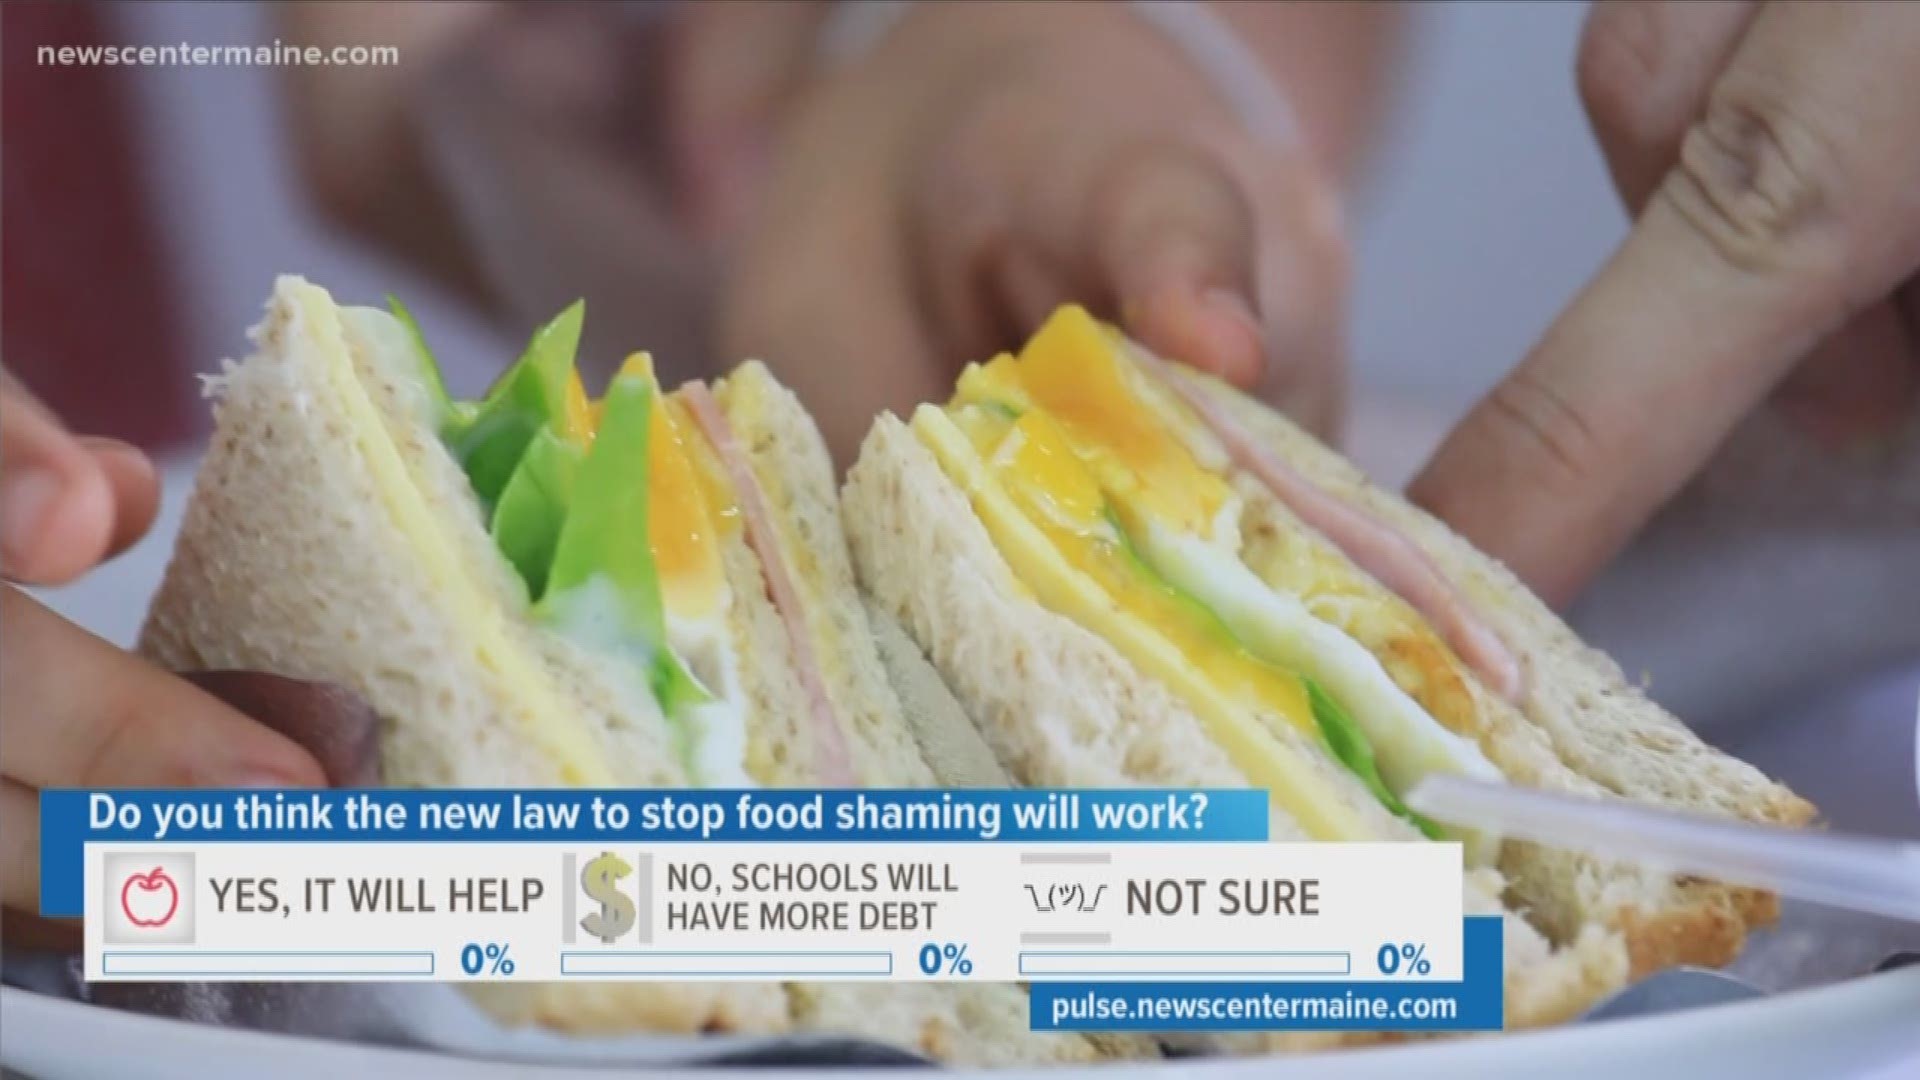 NOW: Will a ban on 'food shaming' work in Maine?